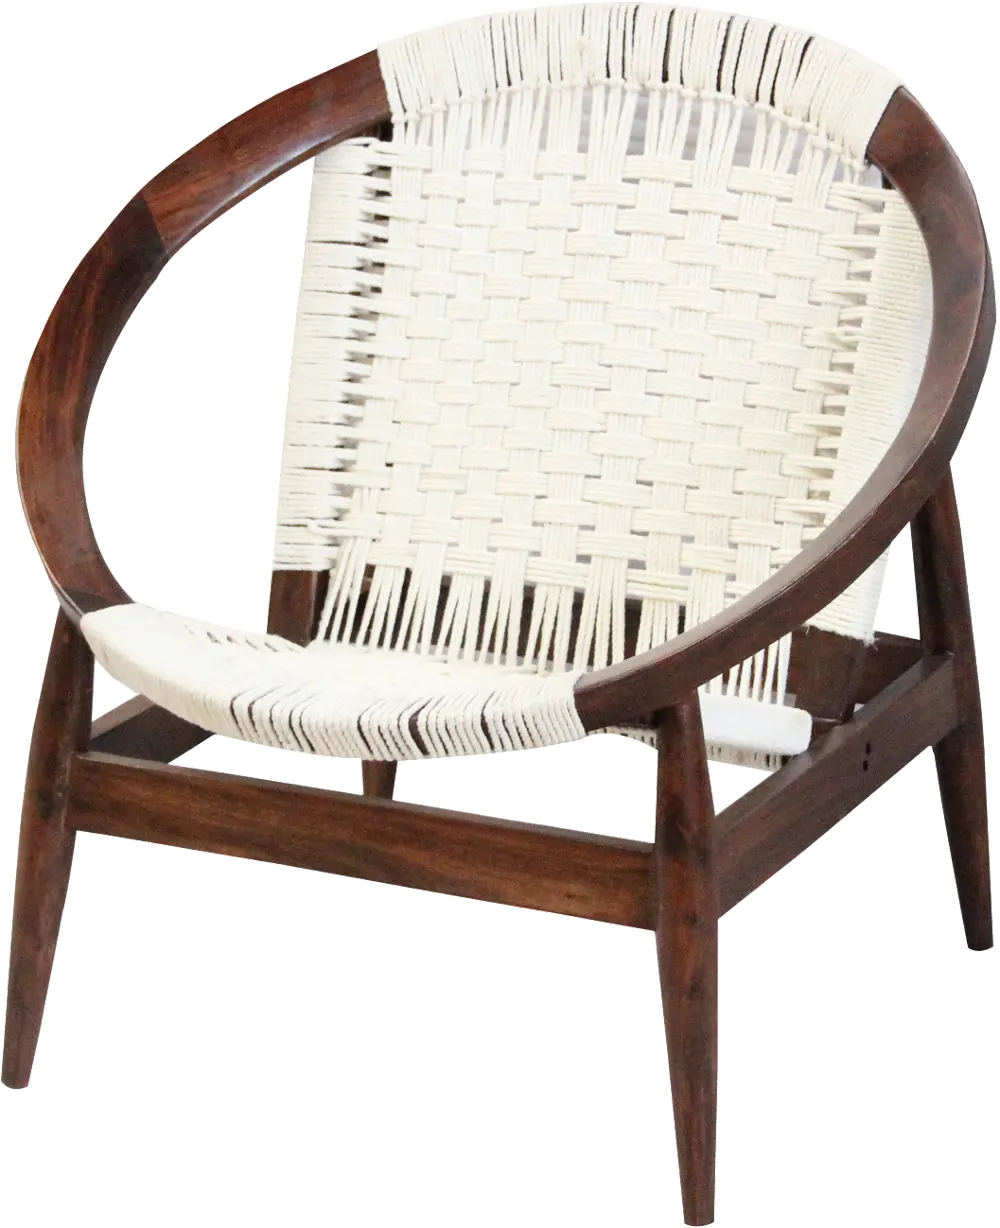 Peraza Urban Off White and Wood Accent Chair-1